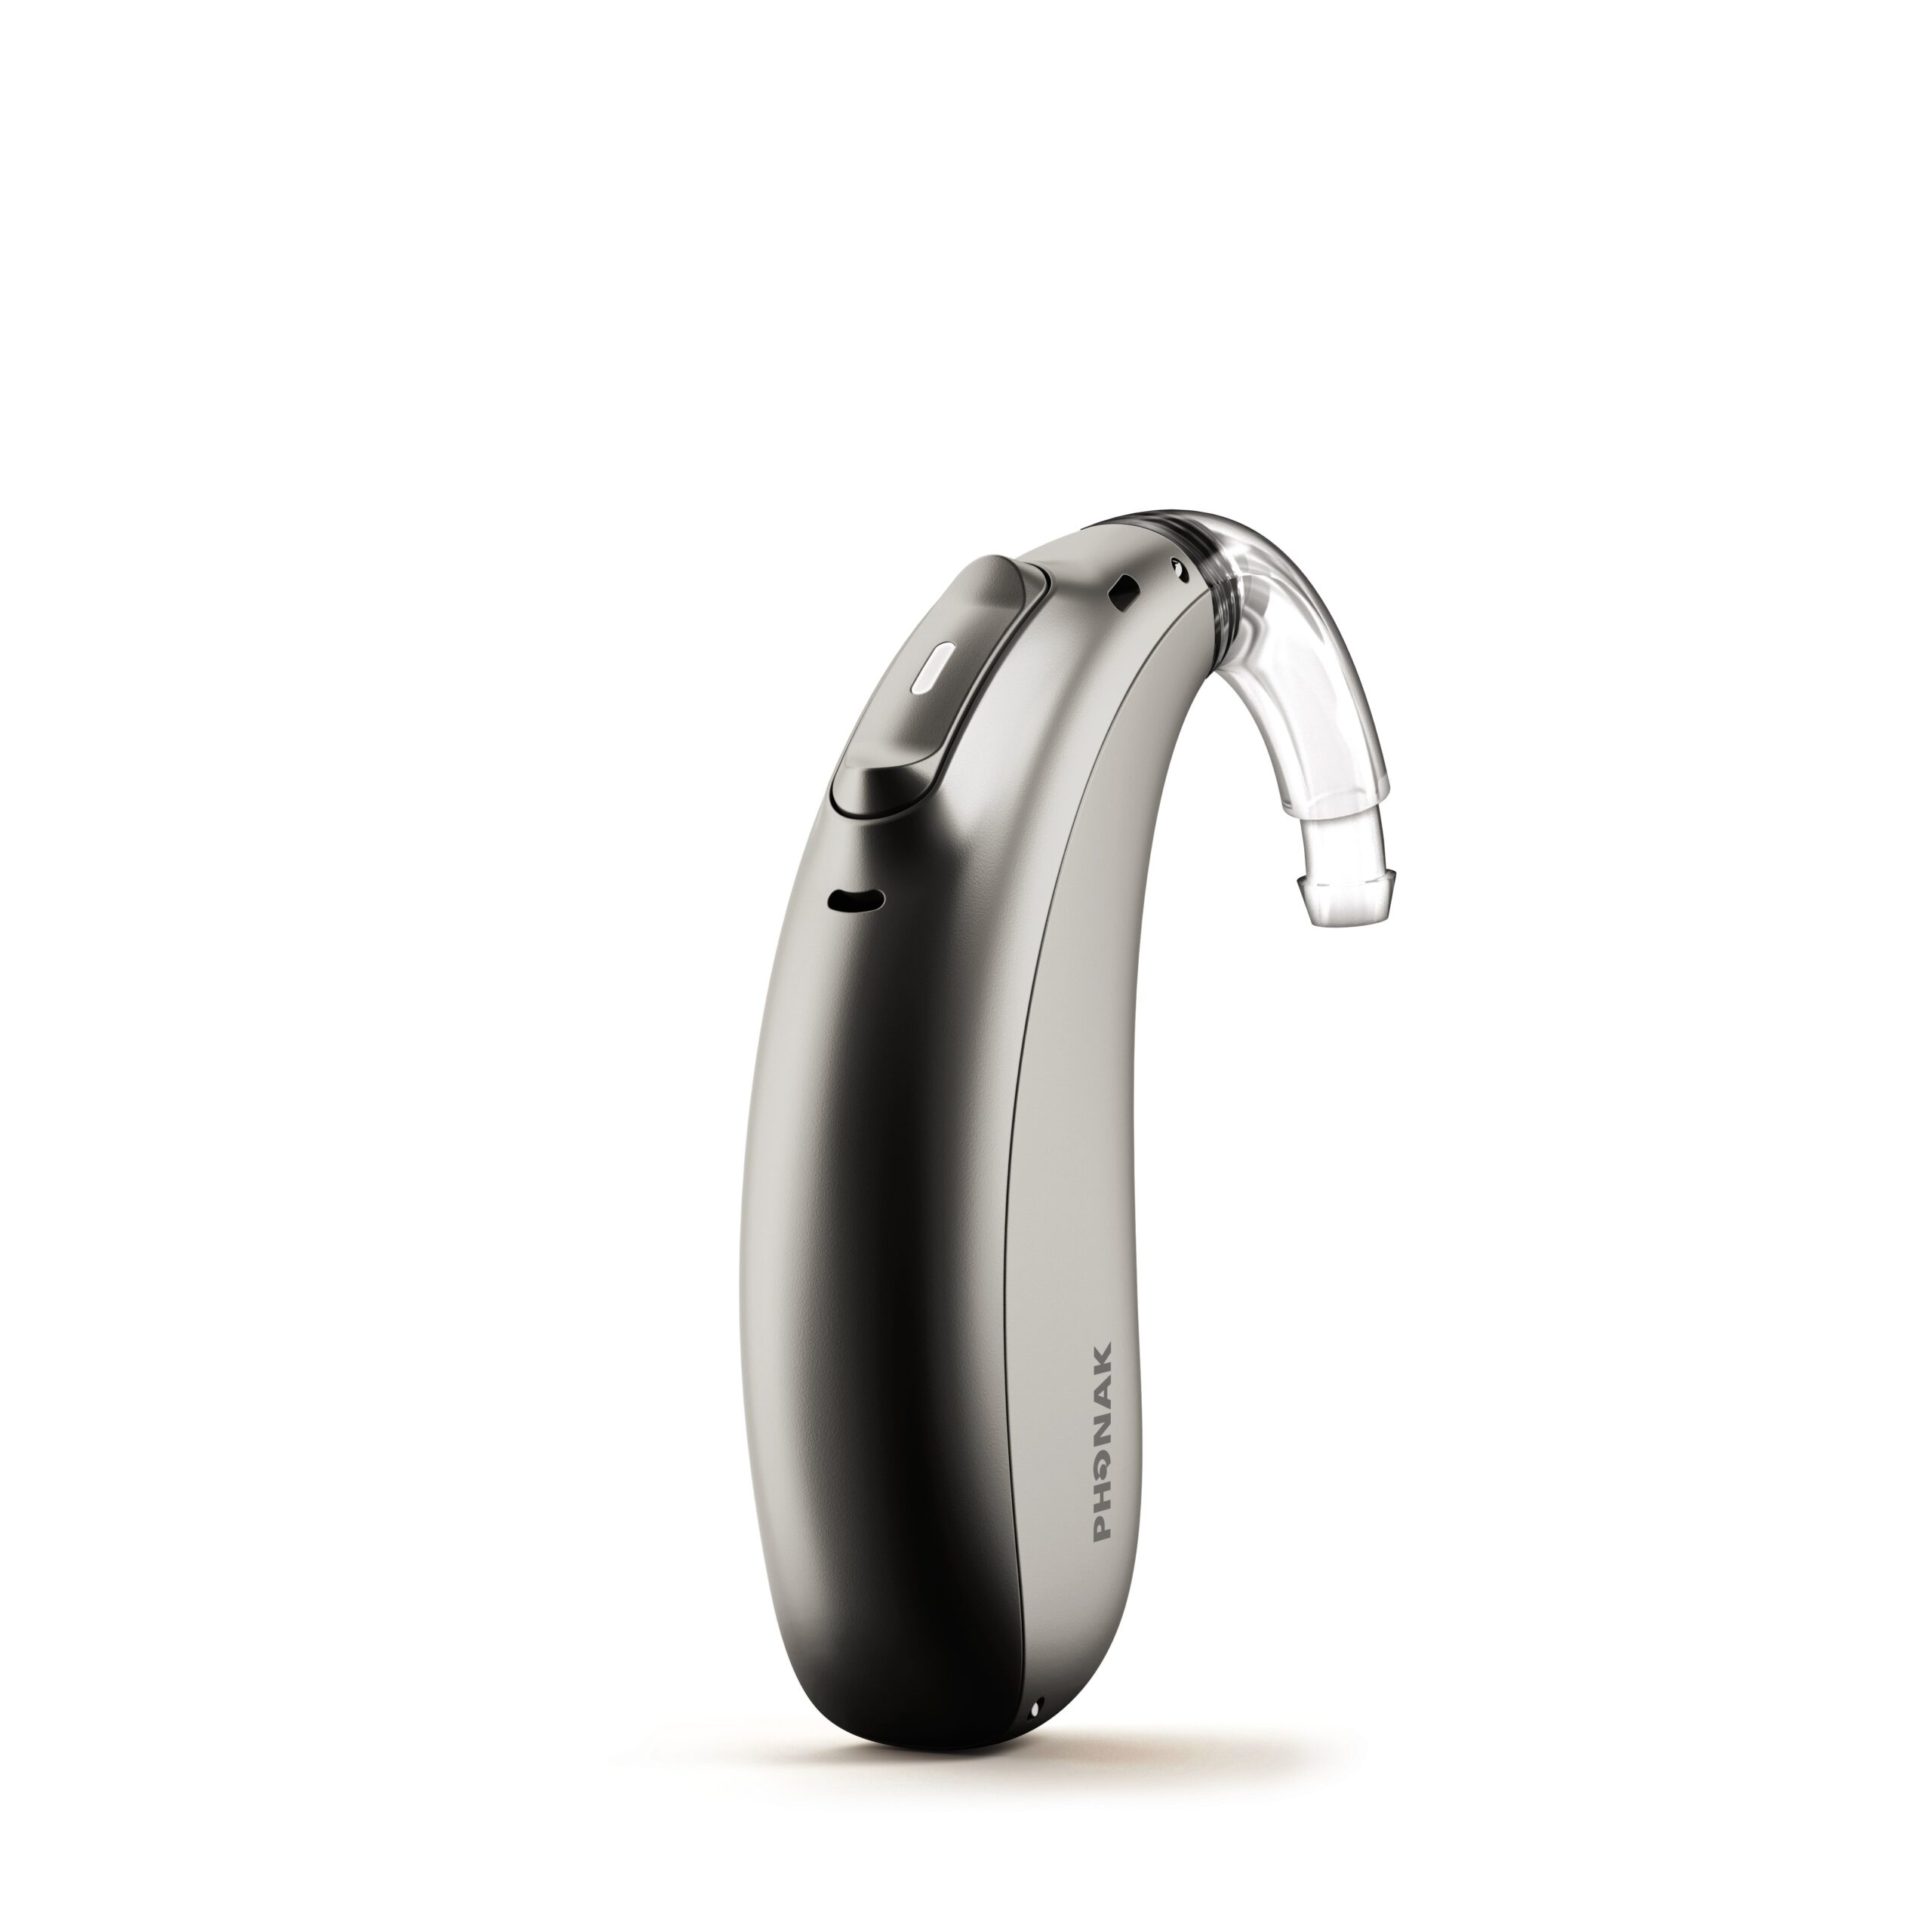 Cecil Amey we have a wide range of BTE Hearing aids